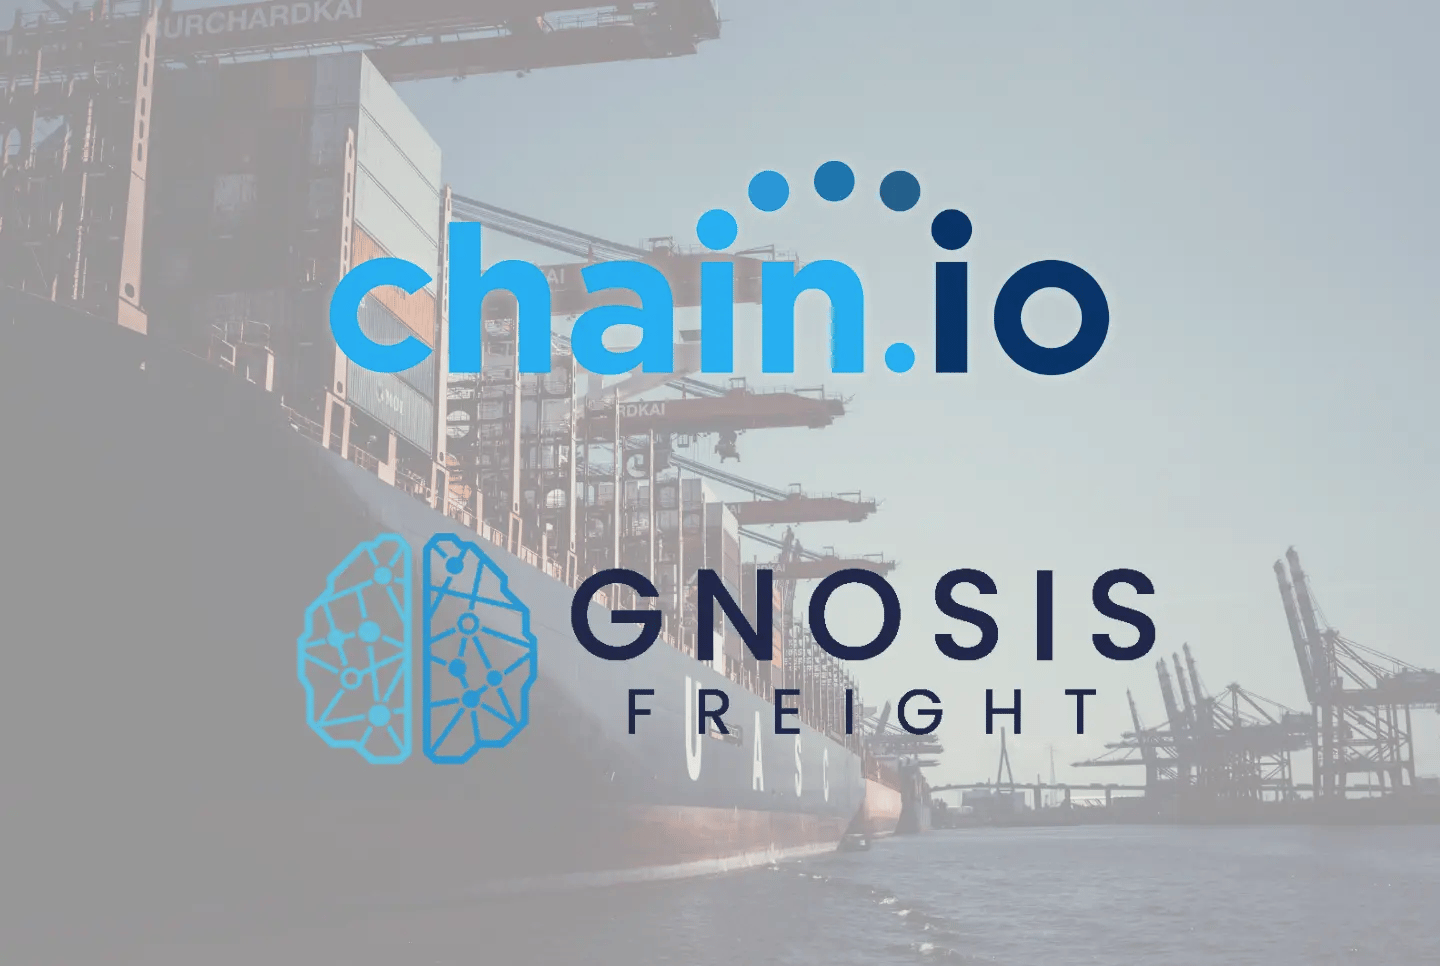 Gnosis Freight, an international freight management platform focused on collaboration and automation, has selected the Chain.io full service integration platform to connect with existing freight systems across the industry. 